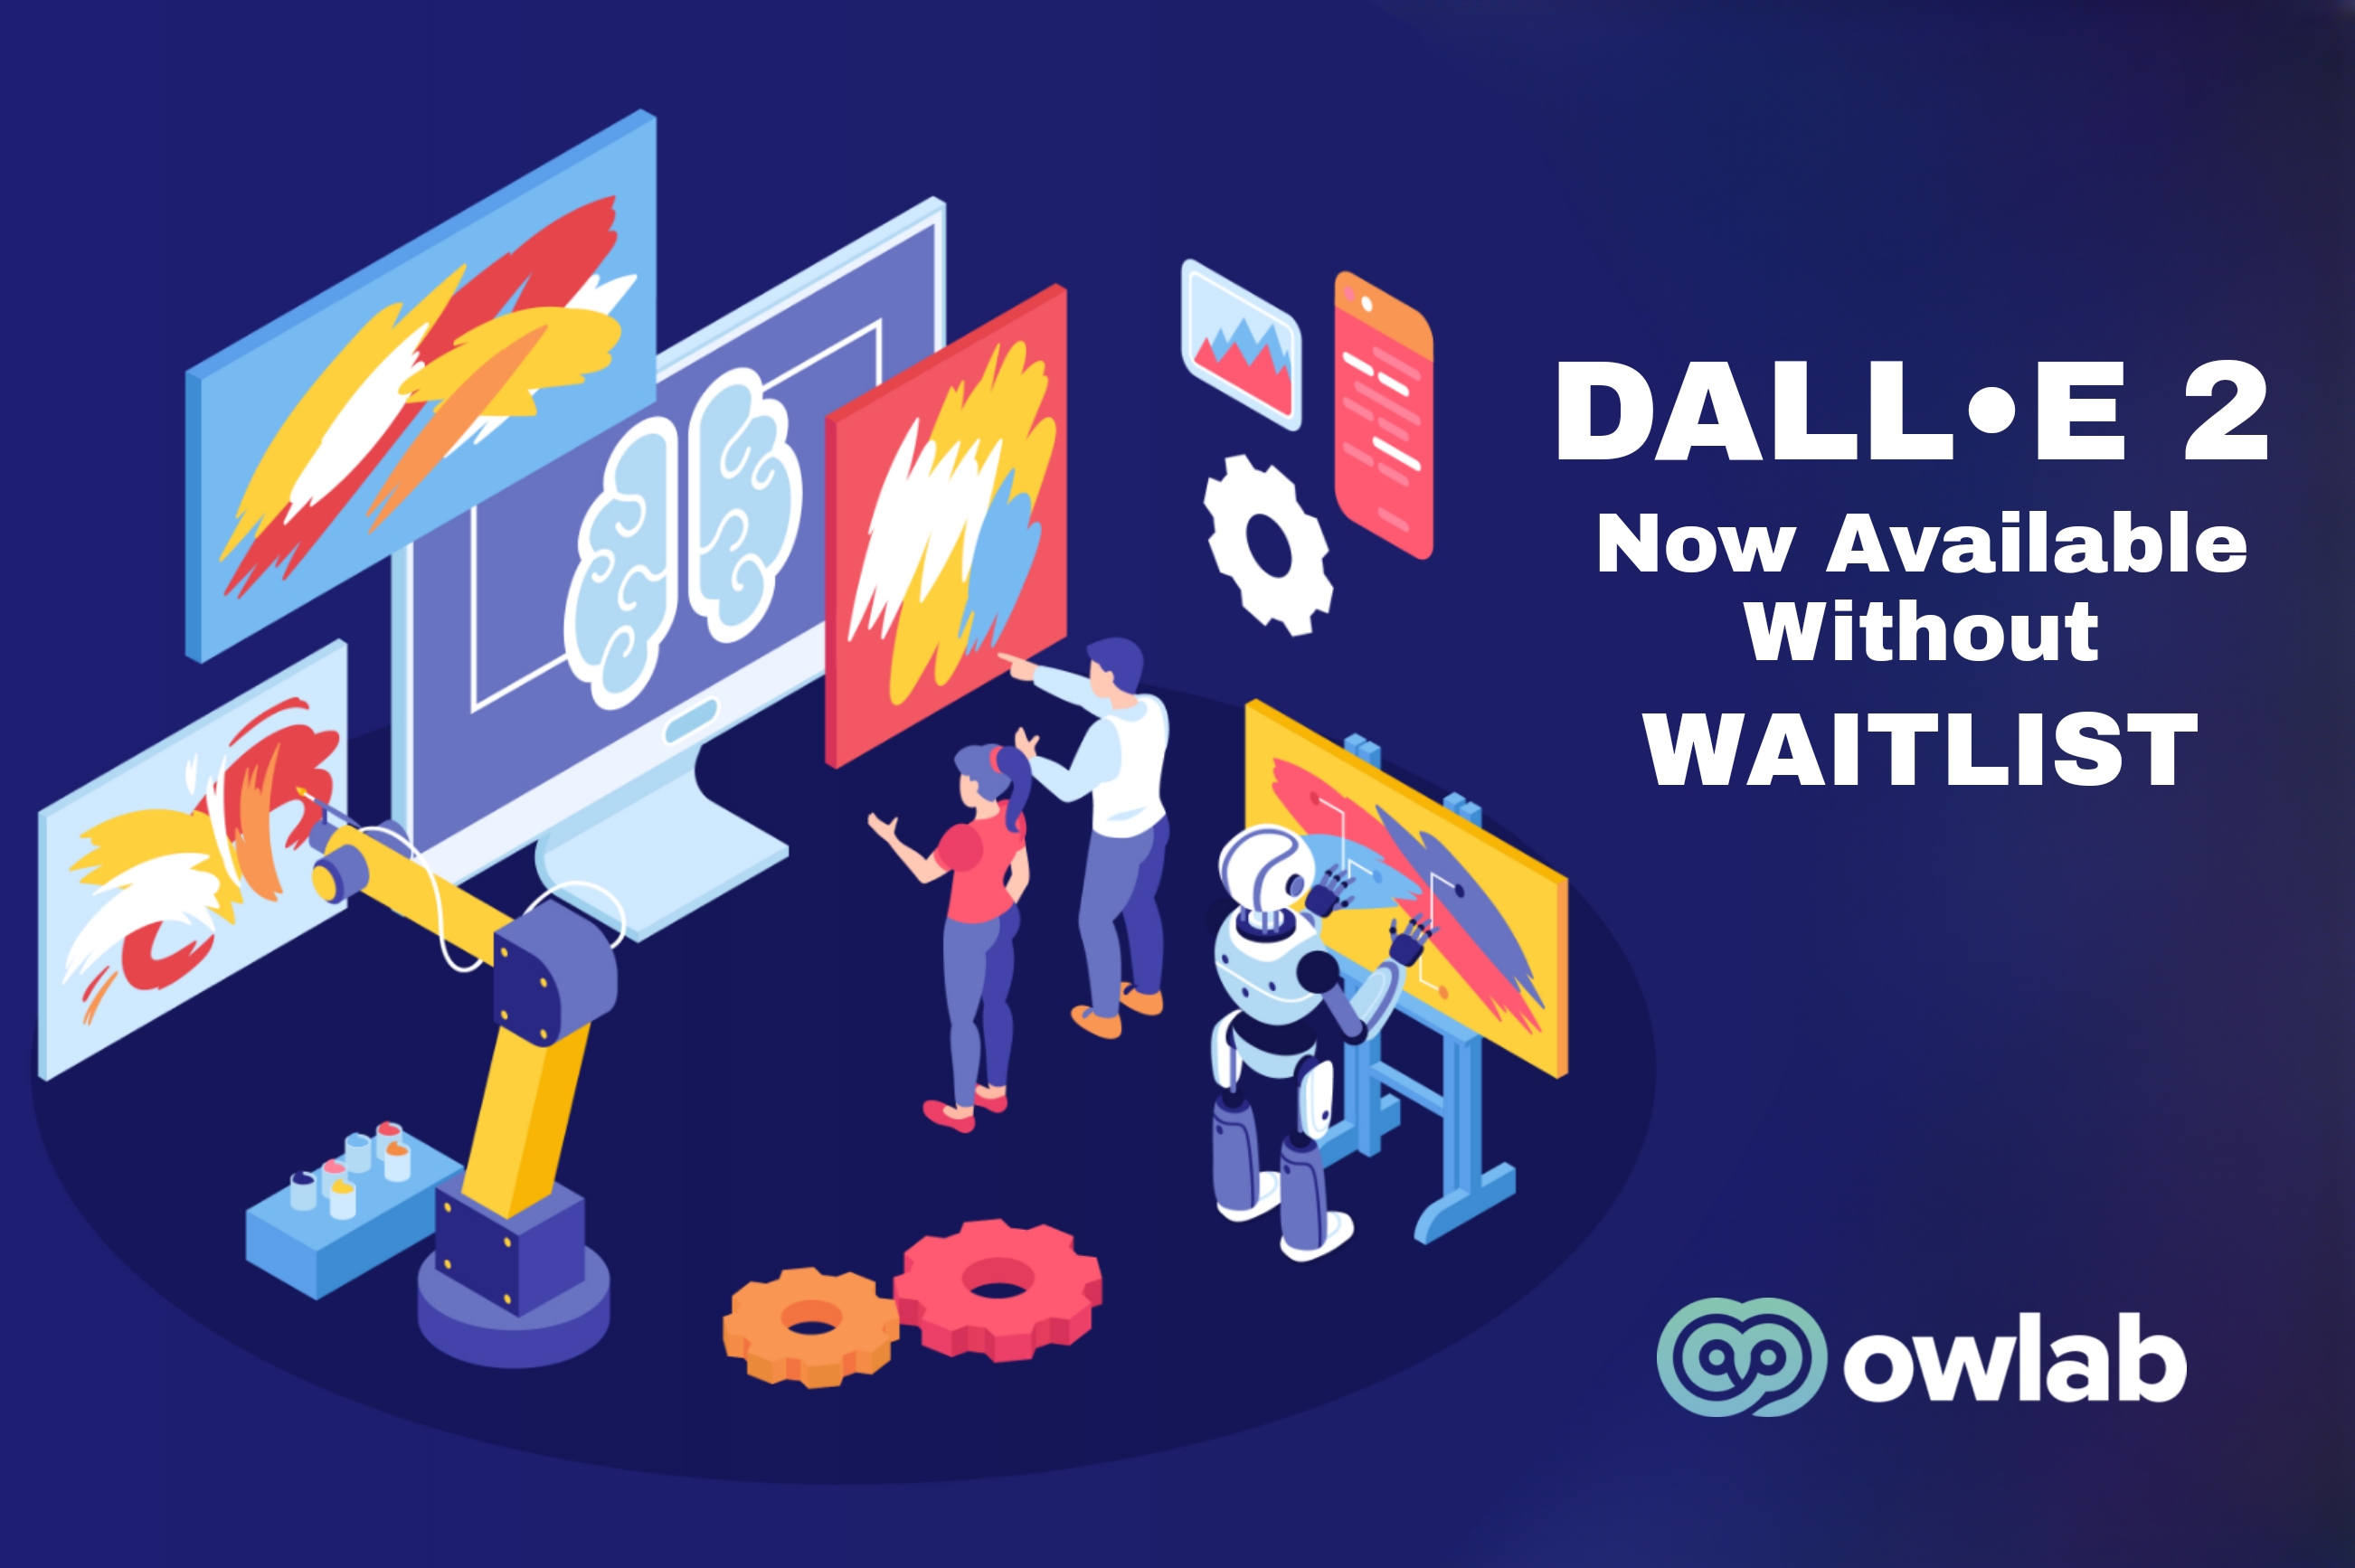 DALL·E 2 Now Available Without Waitlist